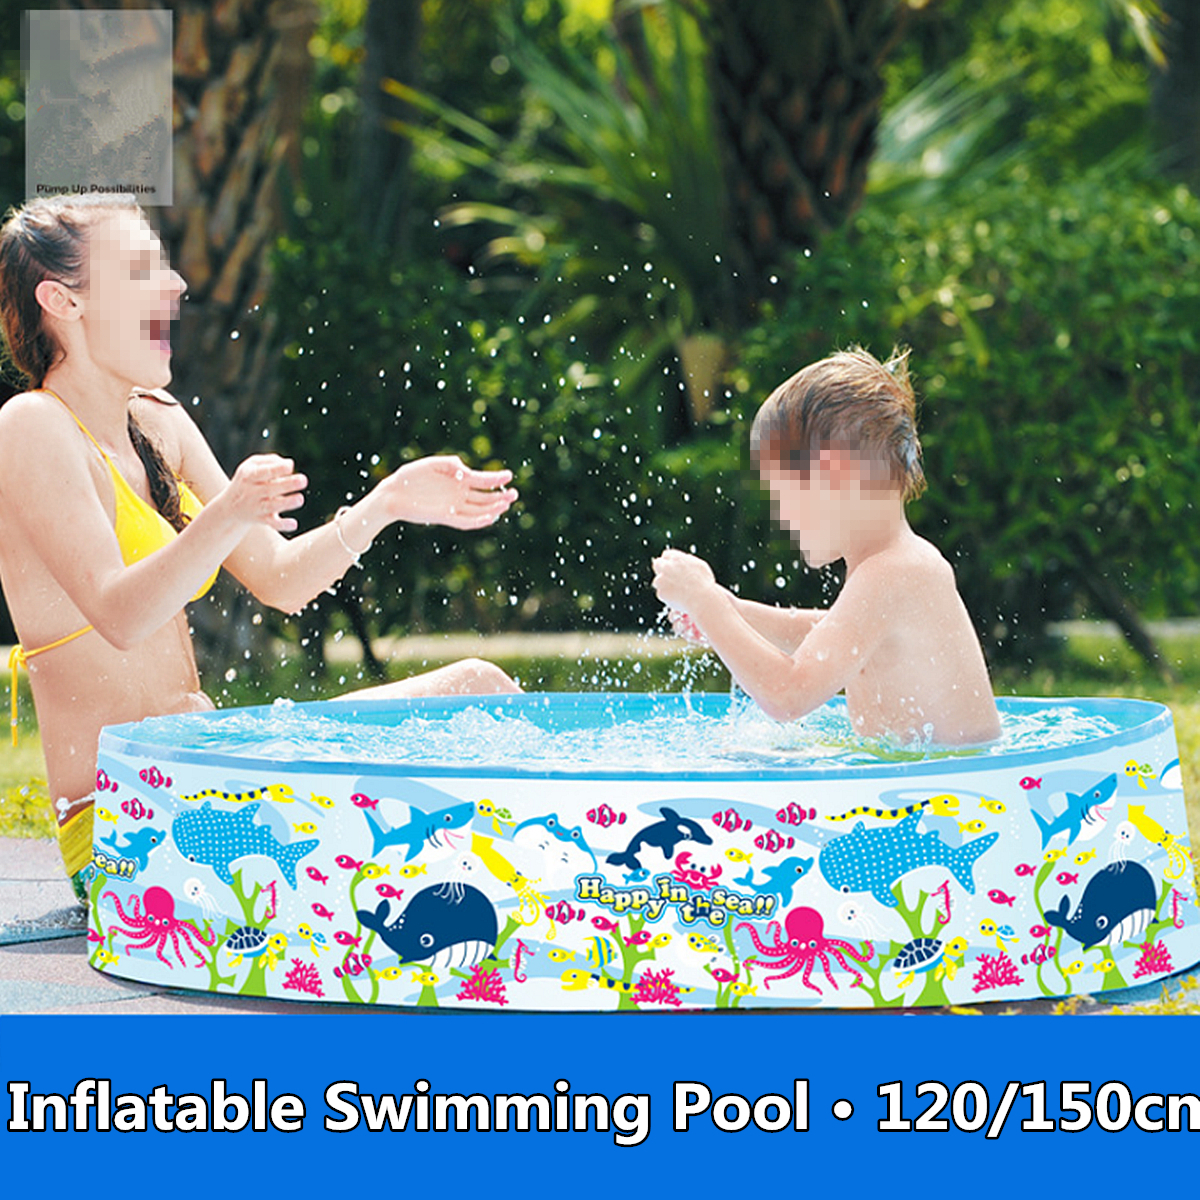 120150cm-Inflatable-Swimming-Pool-Family-Outdoor-Garden-Kid-Play-Bathtub-1697943-2